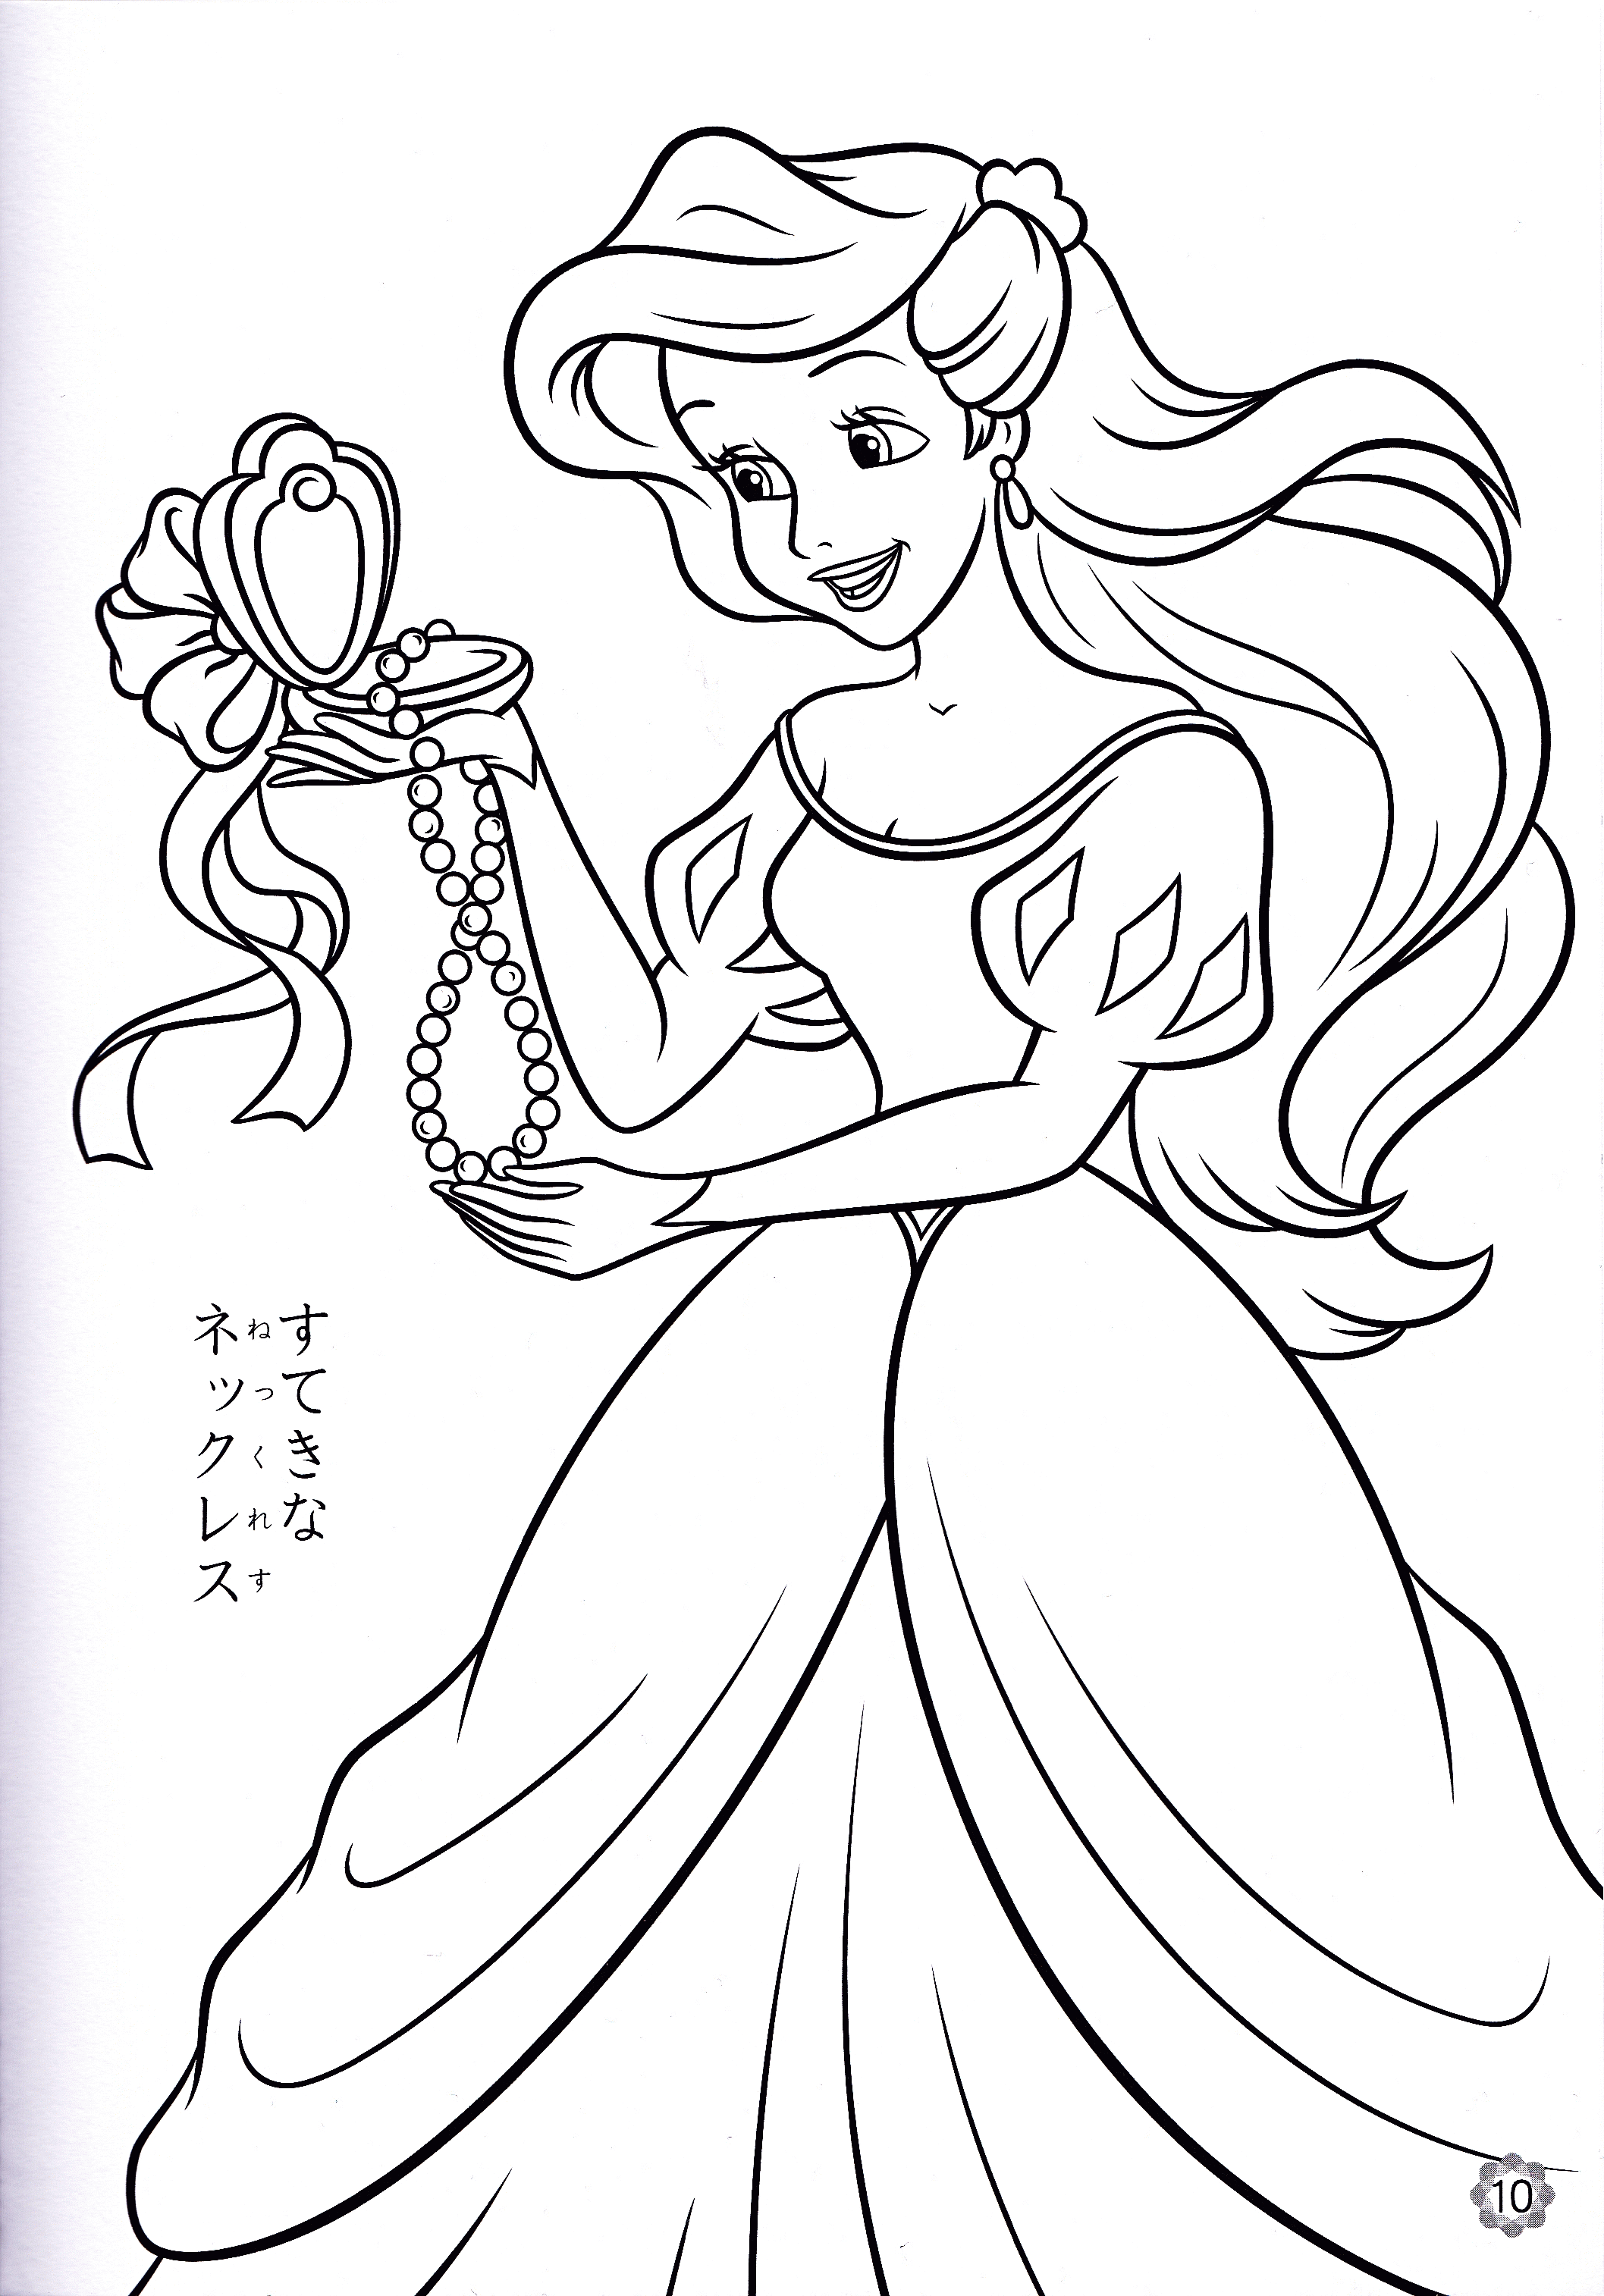 Disney Princess Characters Coloring Pages   Coloring Home